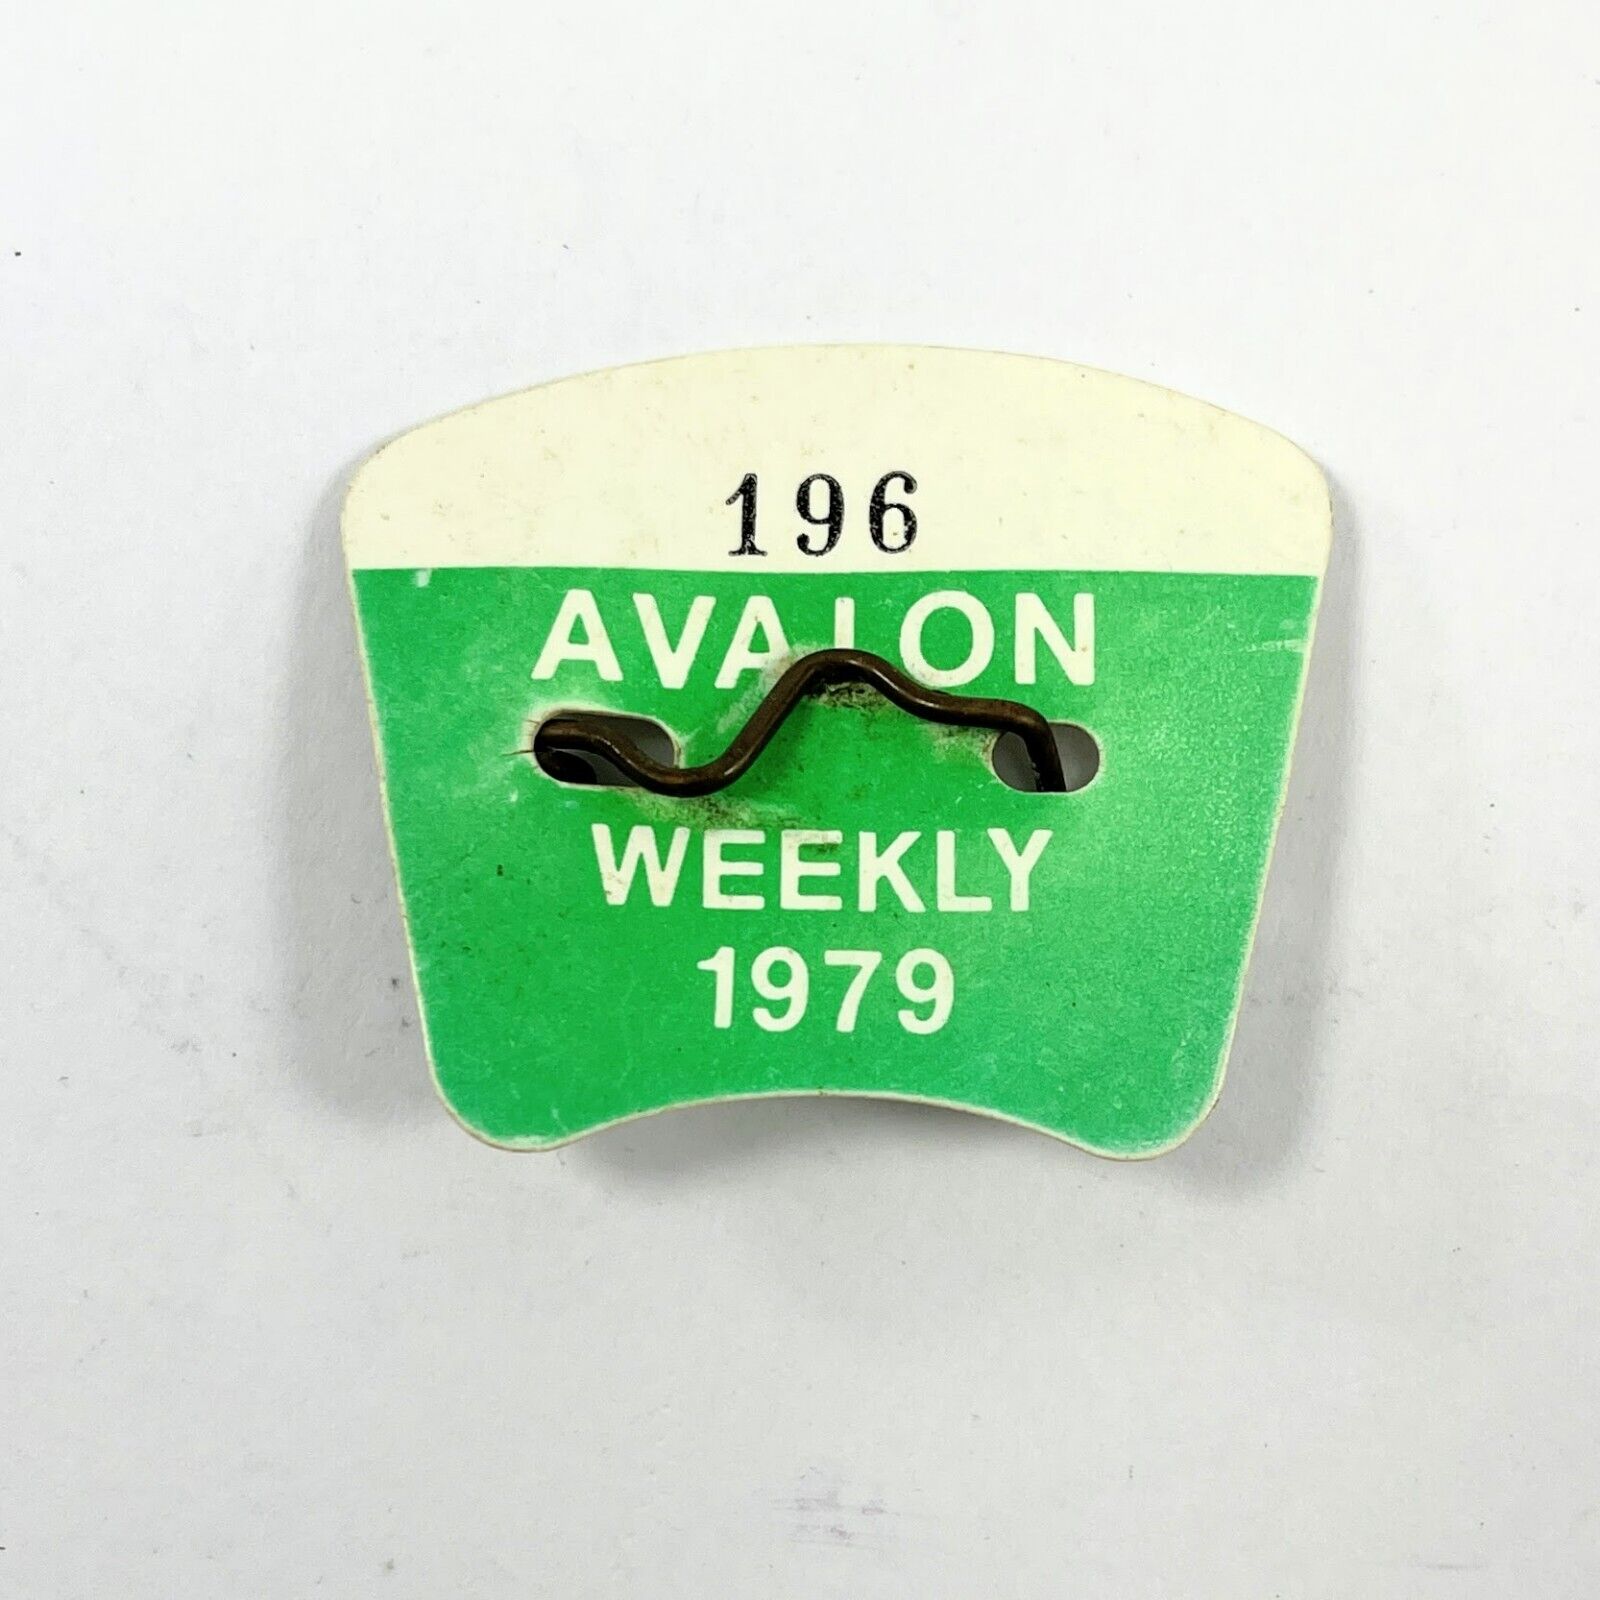 Avalon New Jersey Beach Tag 1979 weekly 196